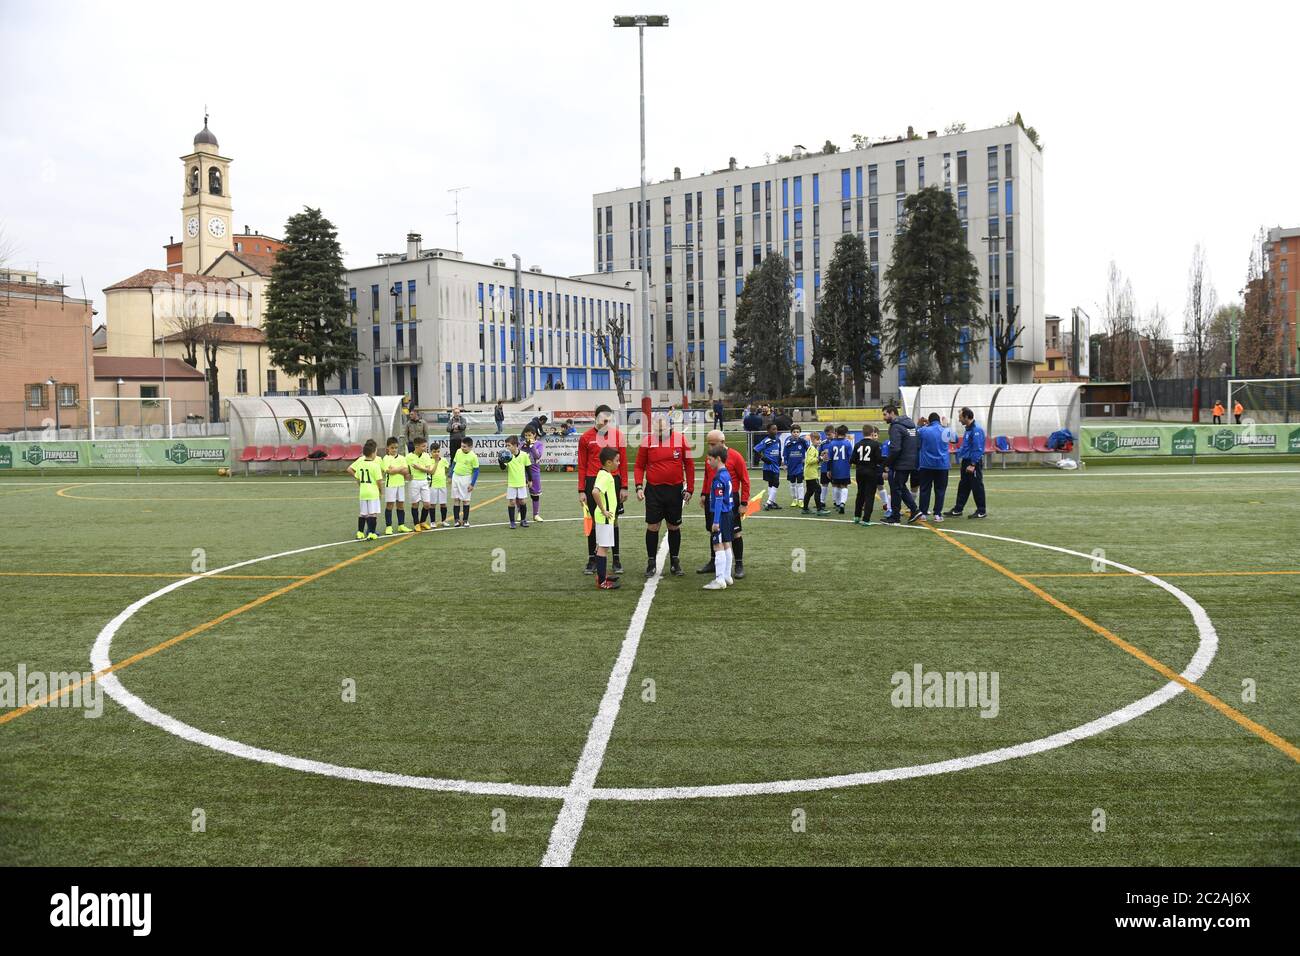 Kids soccer teams with referees standing on center field, in Milan. Stock Photo